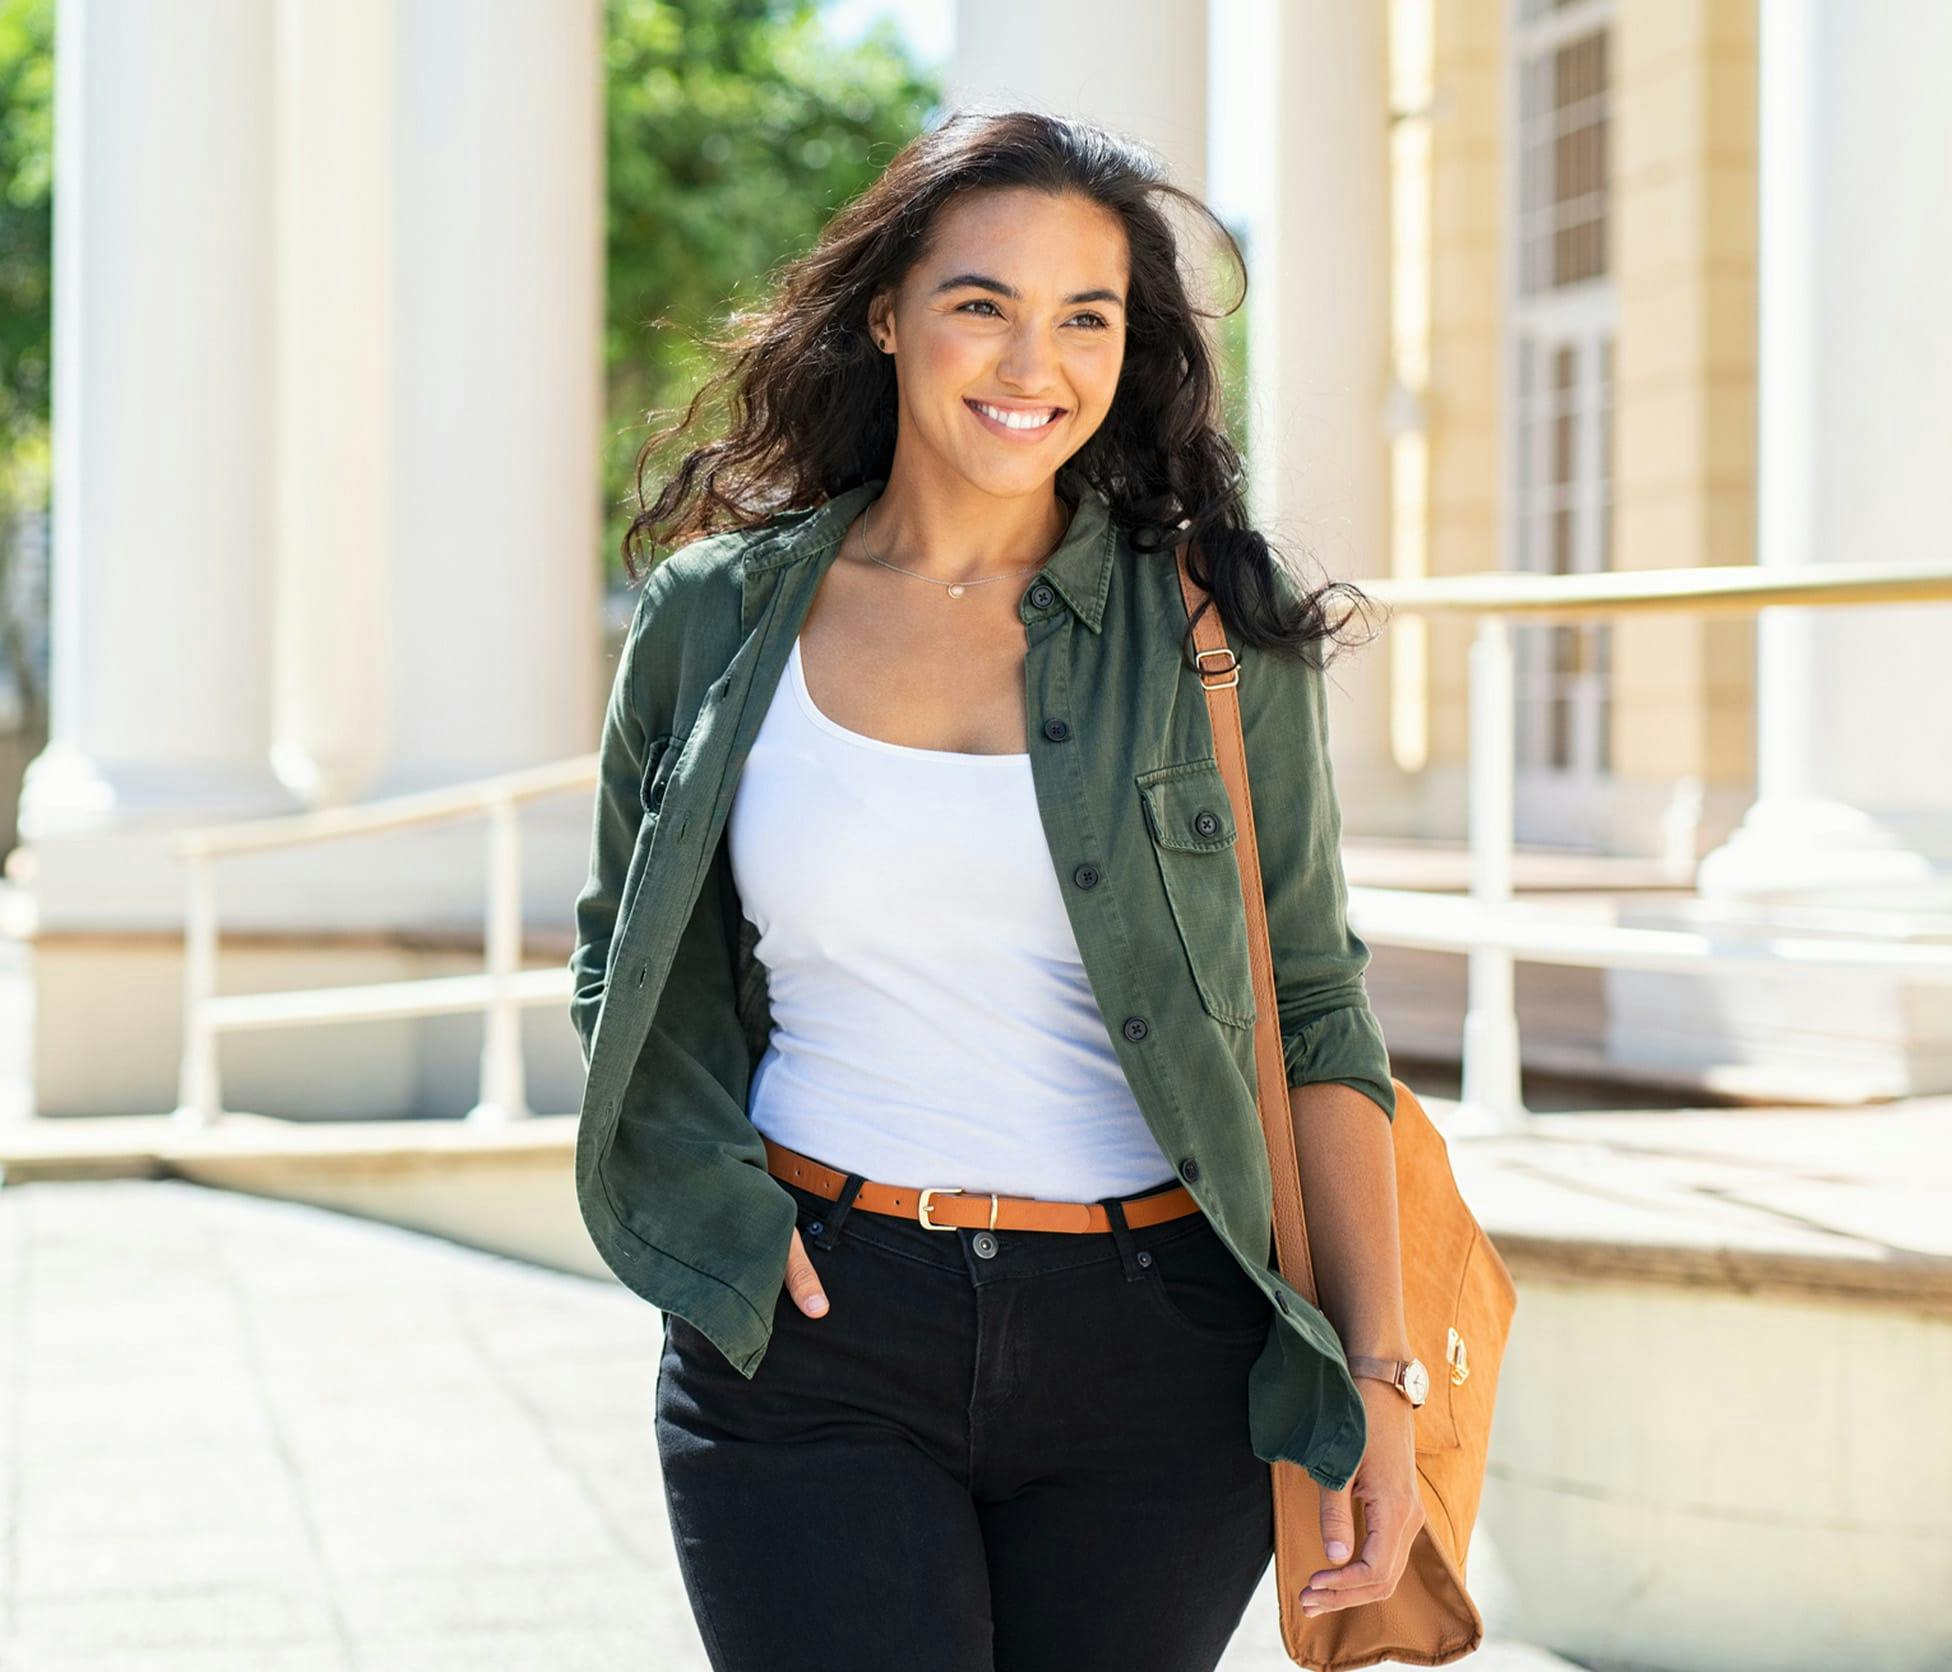 woman smiling and and walking outside with confidence